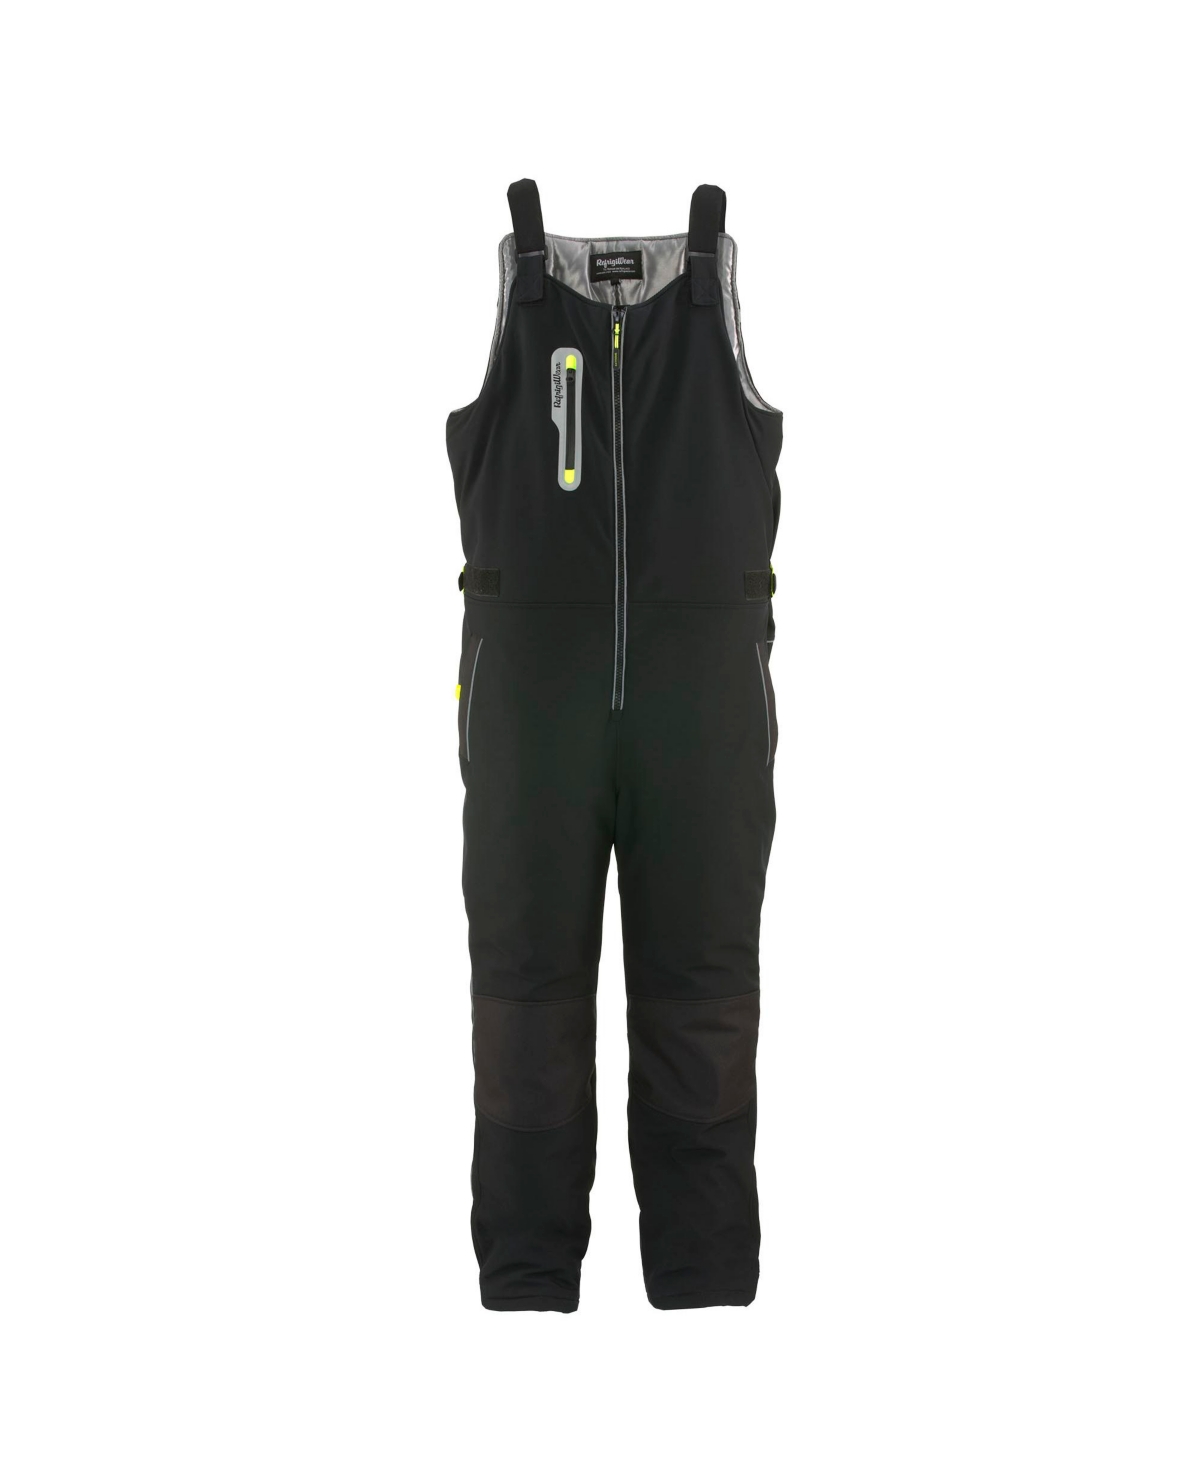 Men's Insulated Extreme Softshell High Bib Overalls -60F Protection - Black